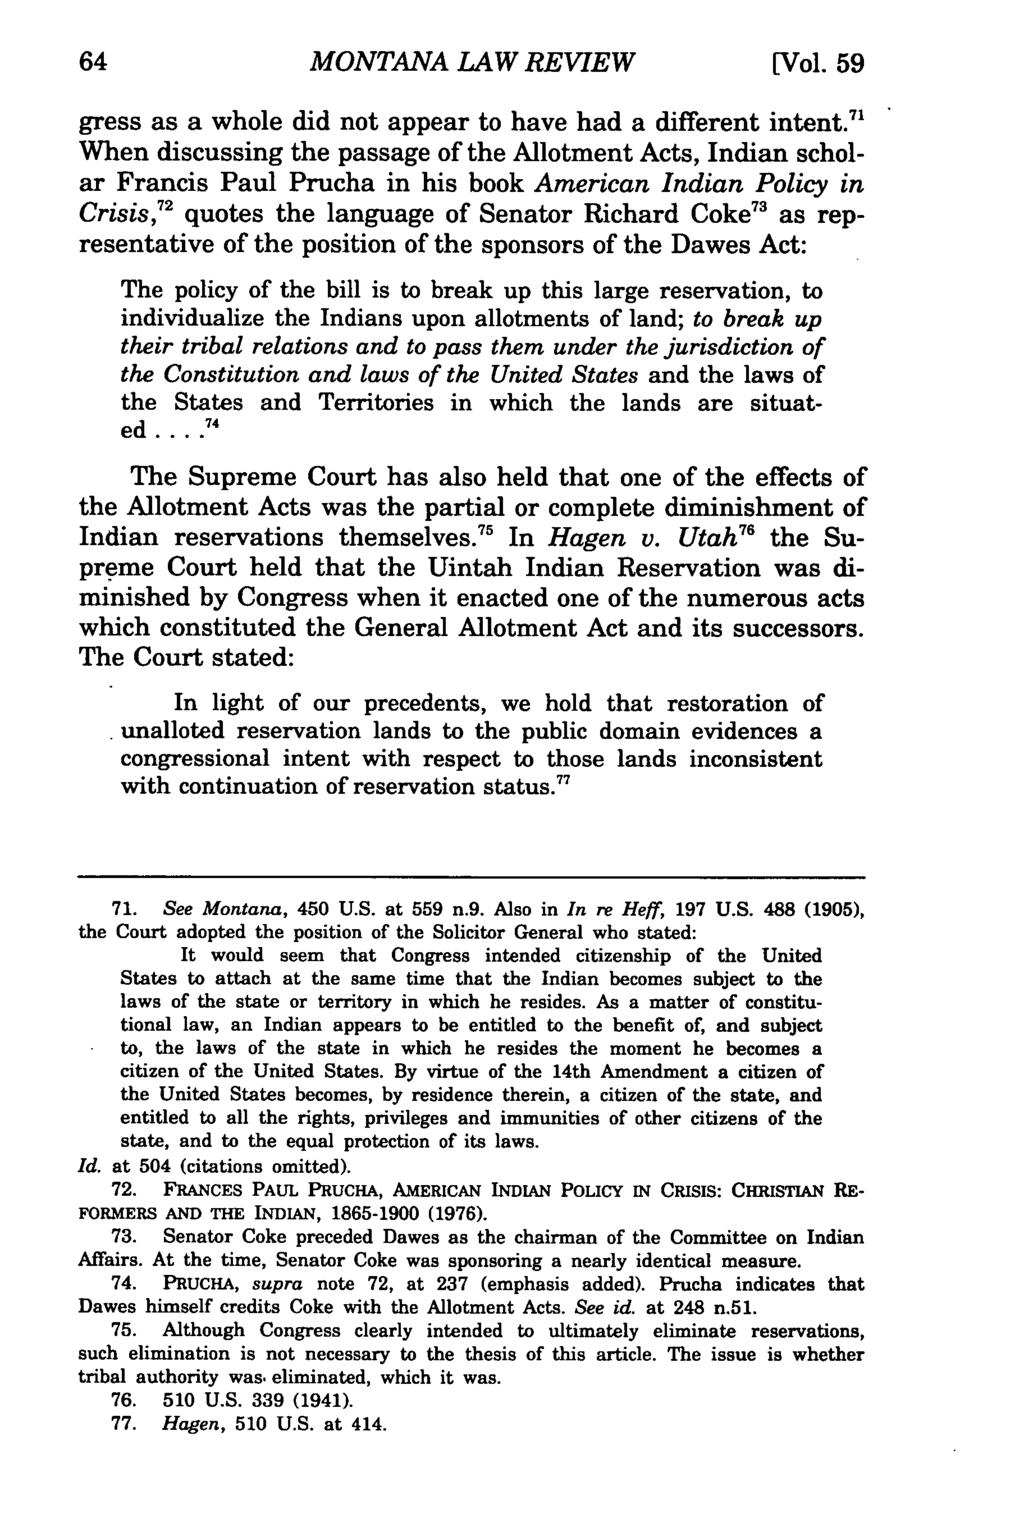 64 Montana MONTANA Law Review, LAW Vol. 59 REVIEW [1998], Iss. 1, Art. 4 [Vol. 59 gress as a whole did not appear to have had a different intent.